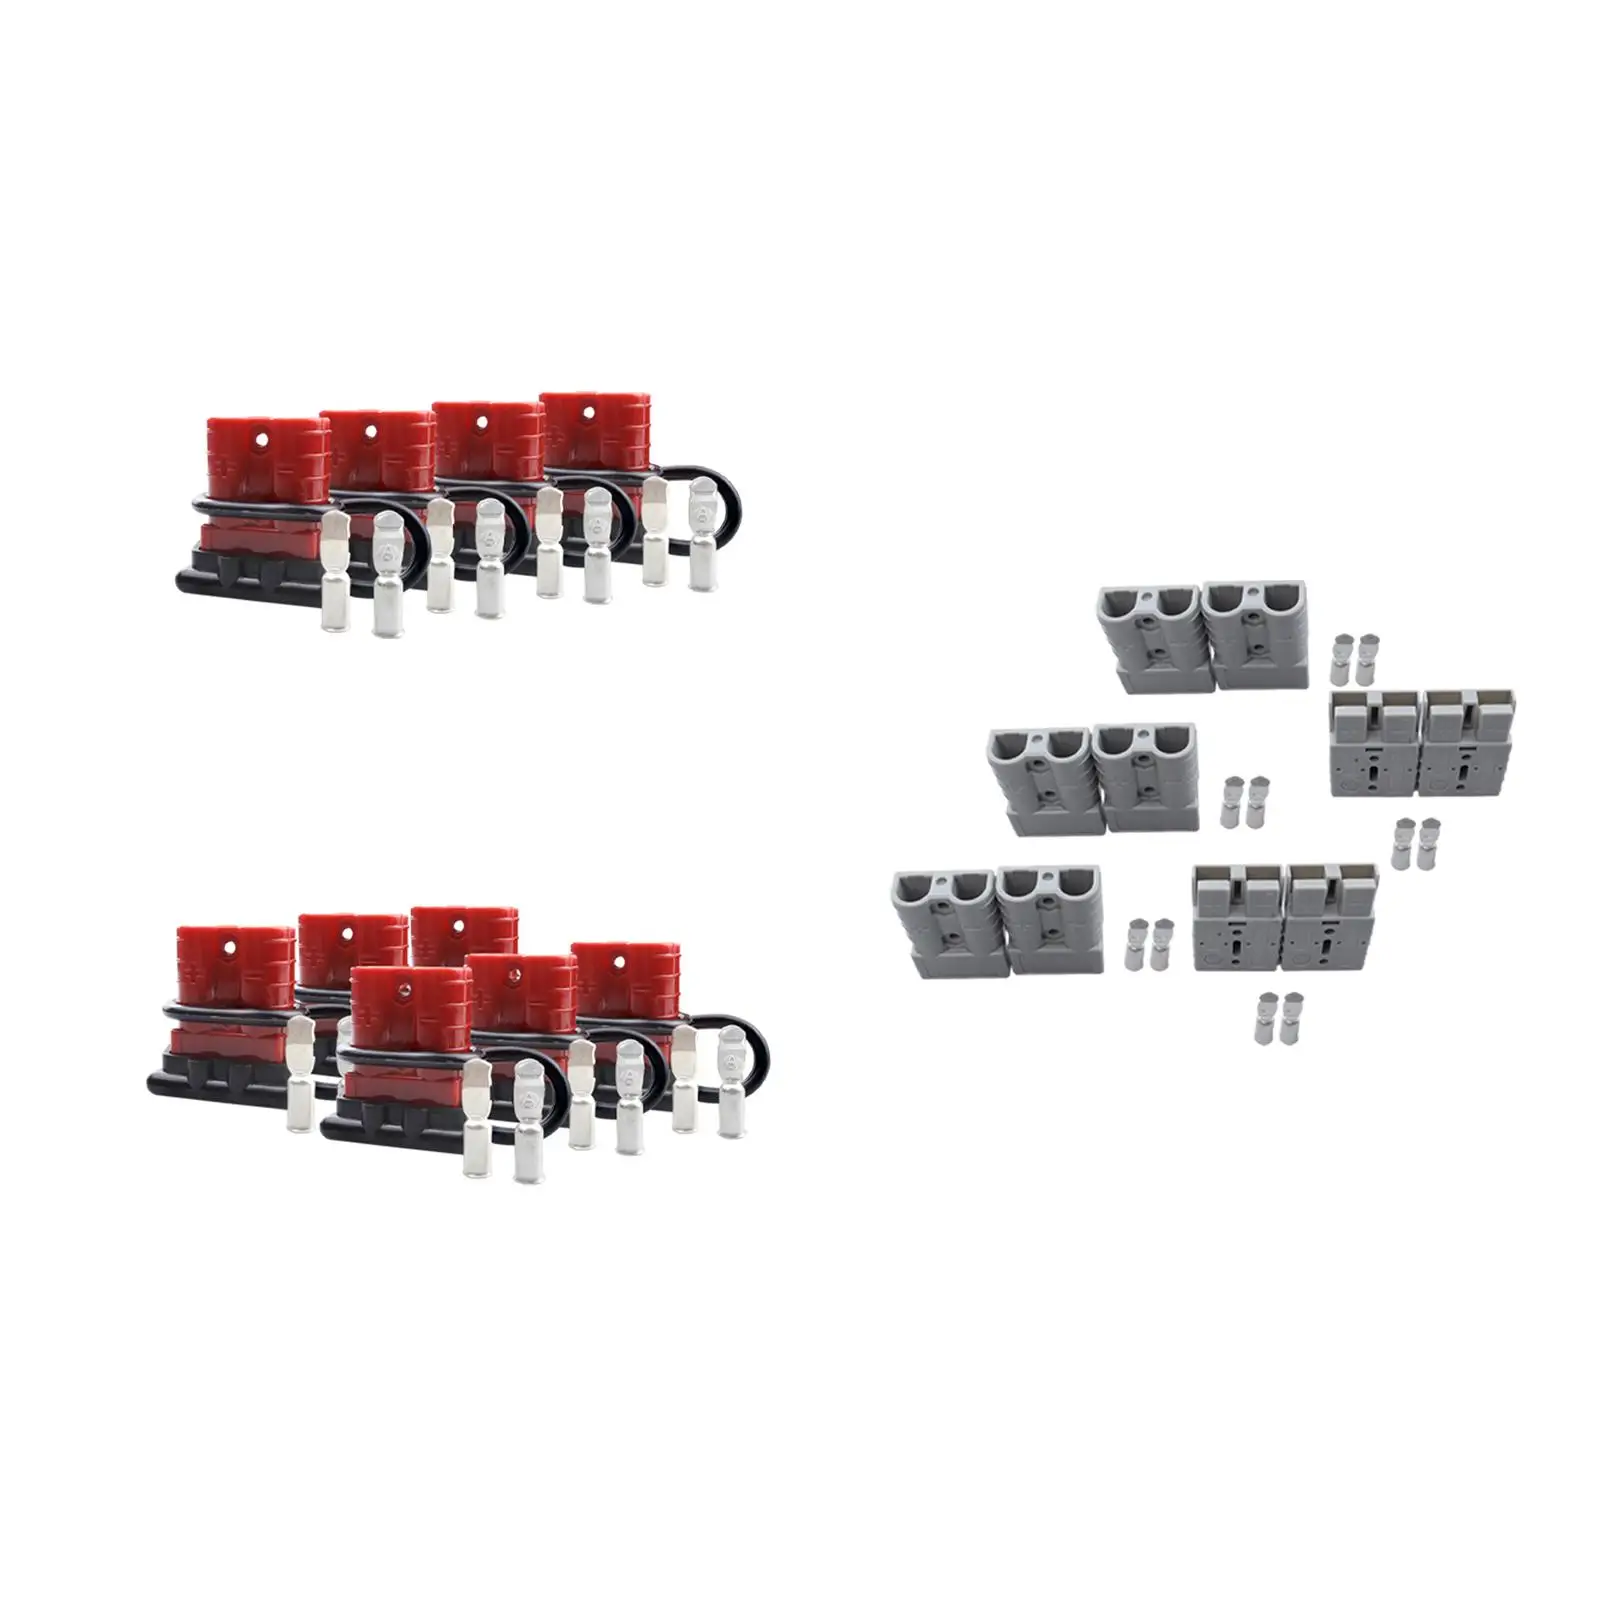 Battery Cable Quick Connect Disconnect Plug Wire Harness Plug Set 50A for Trailer Winch Lifts Motors Car Electrical Devices